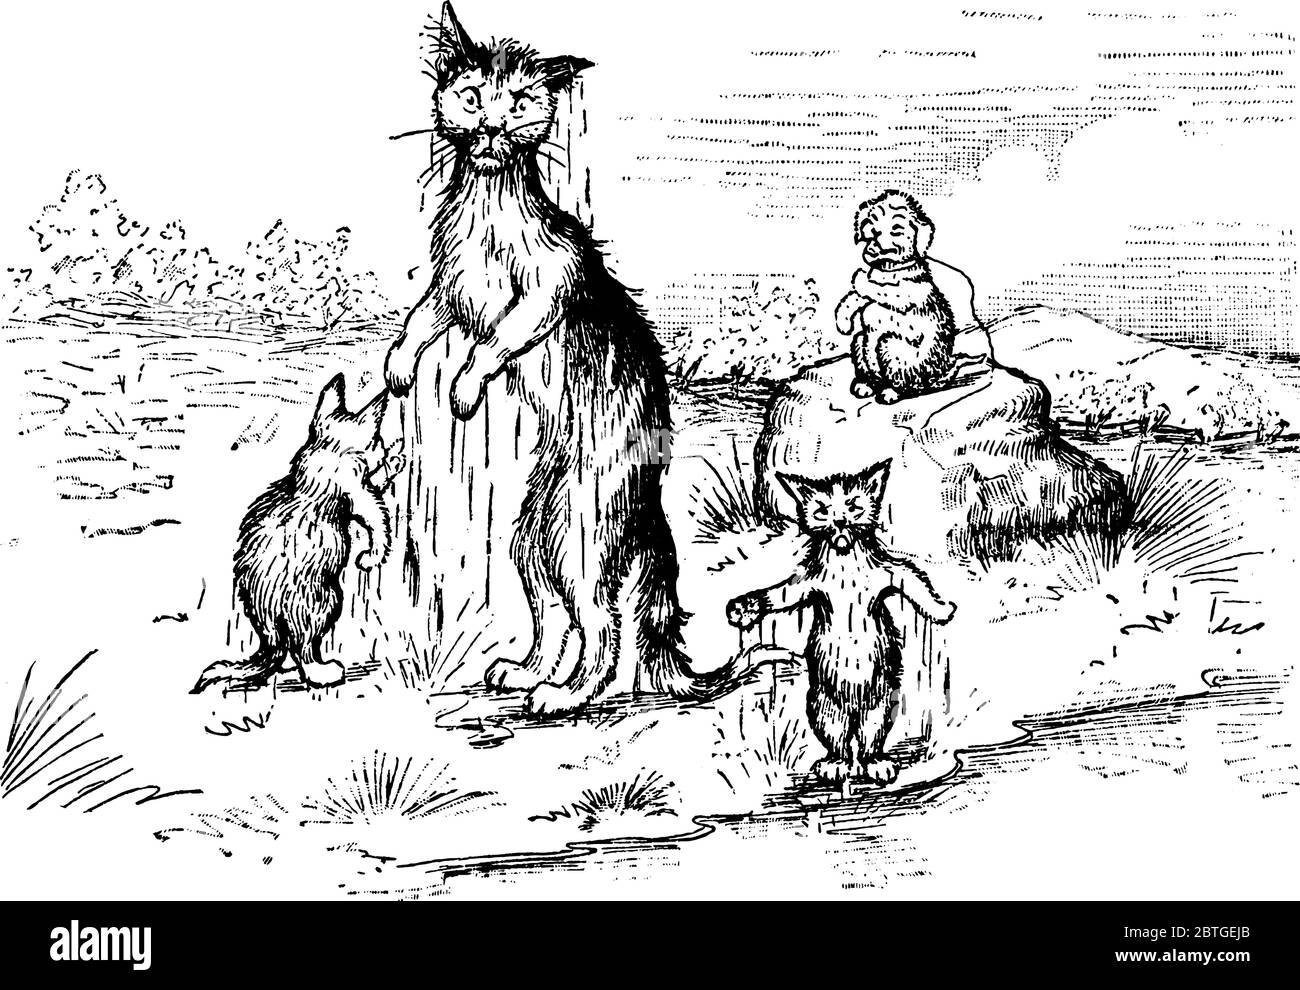 A typical representation of three cats getting wet in rain and playing, vintage line drawing or engraving illustration Stock Vector